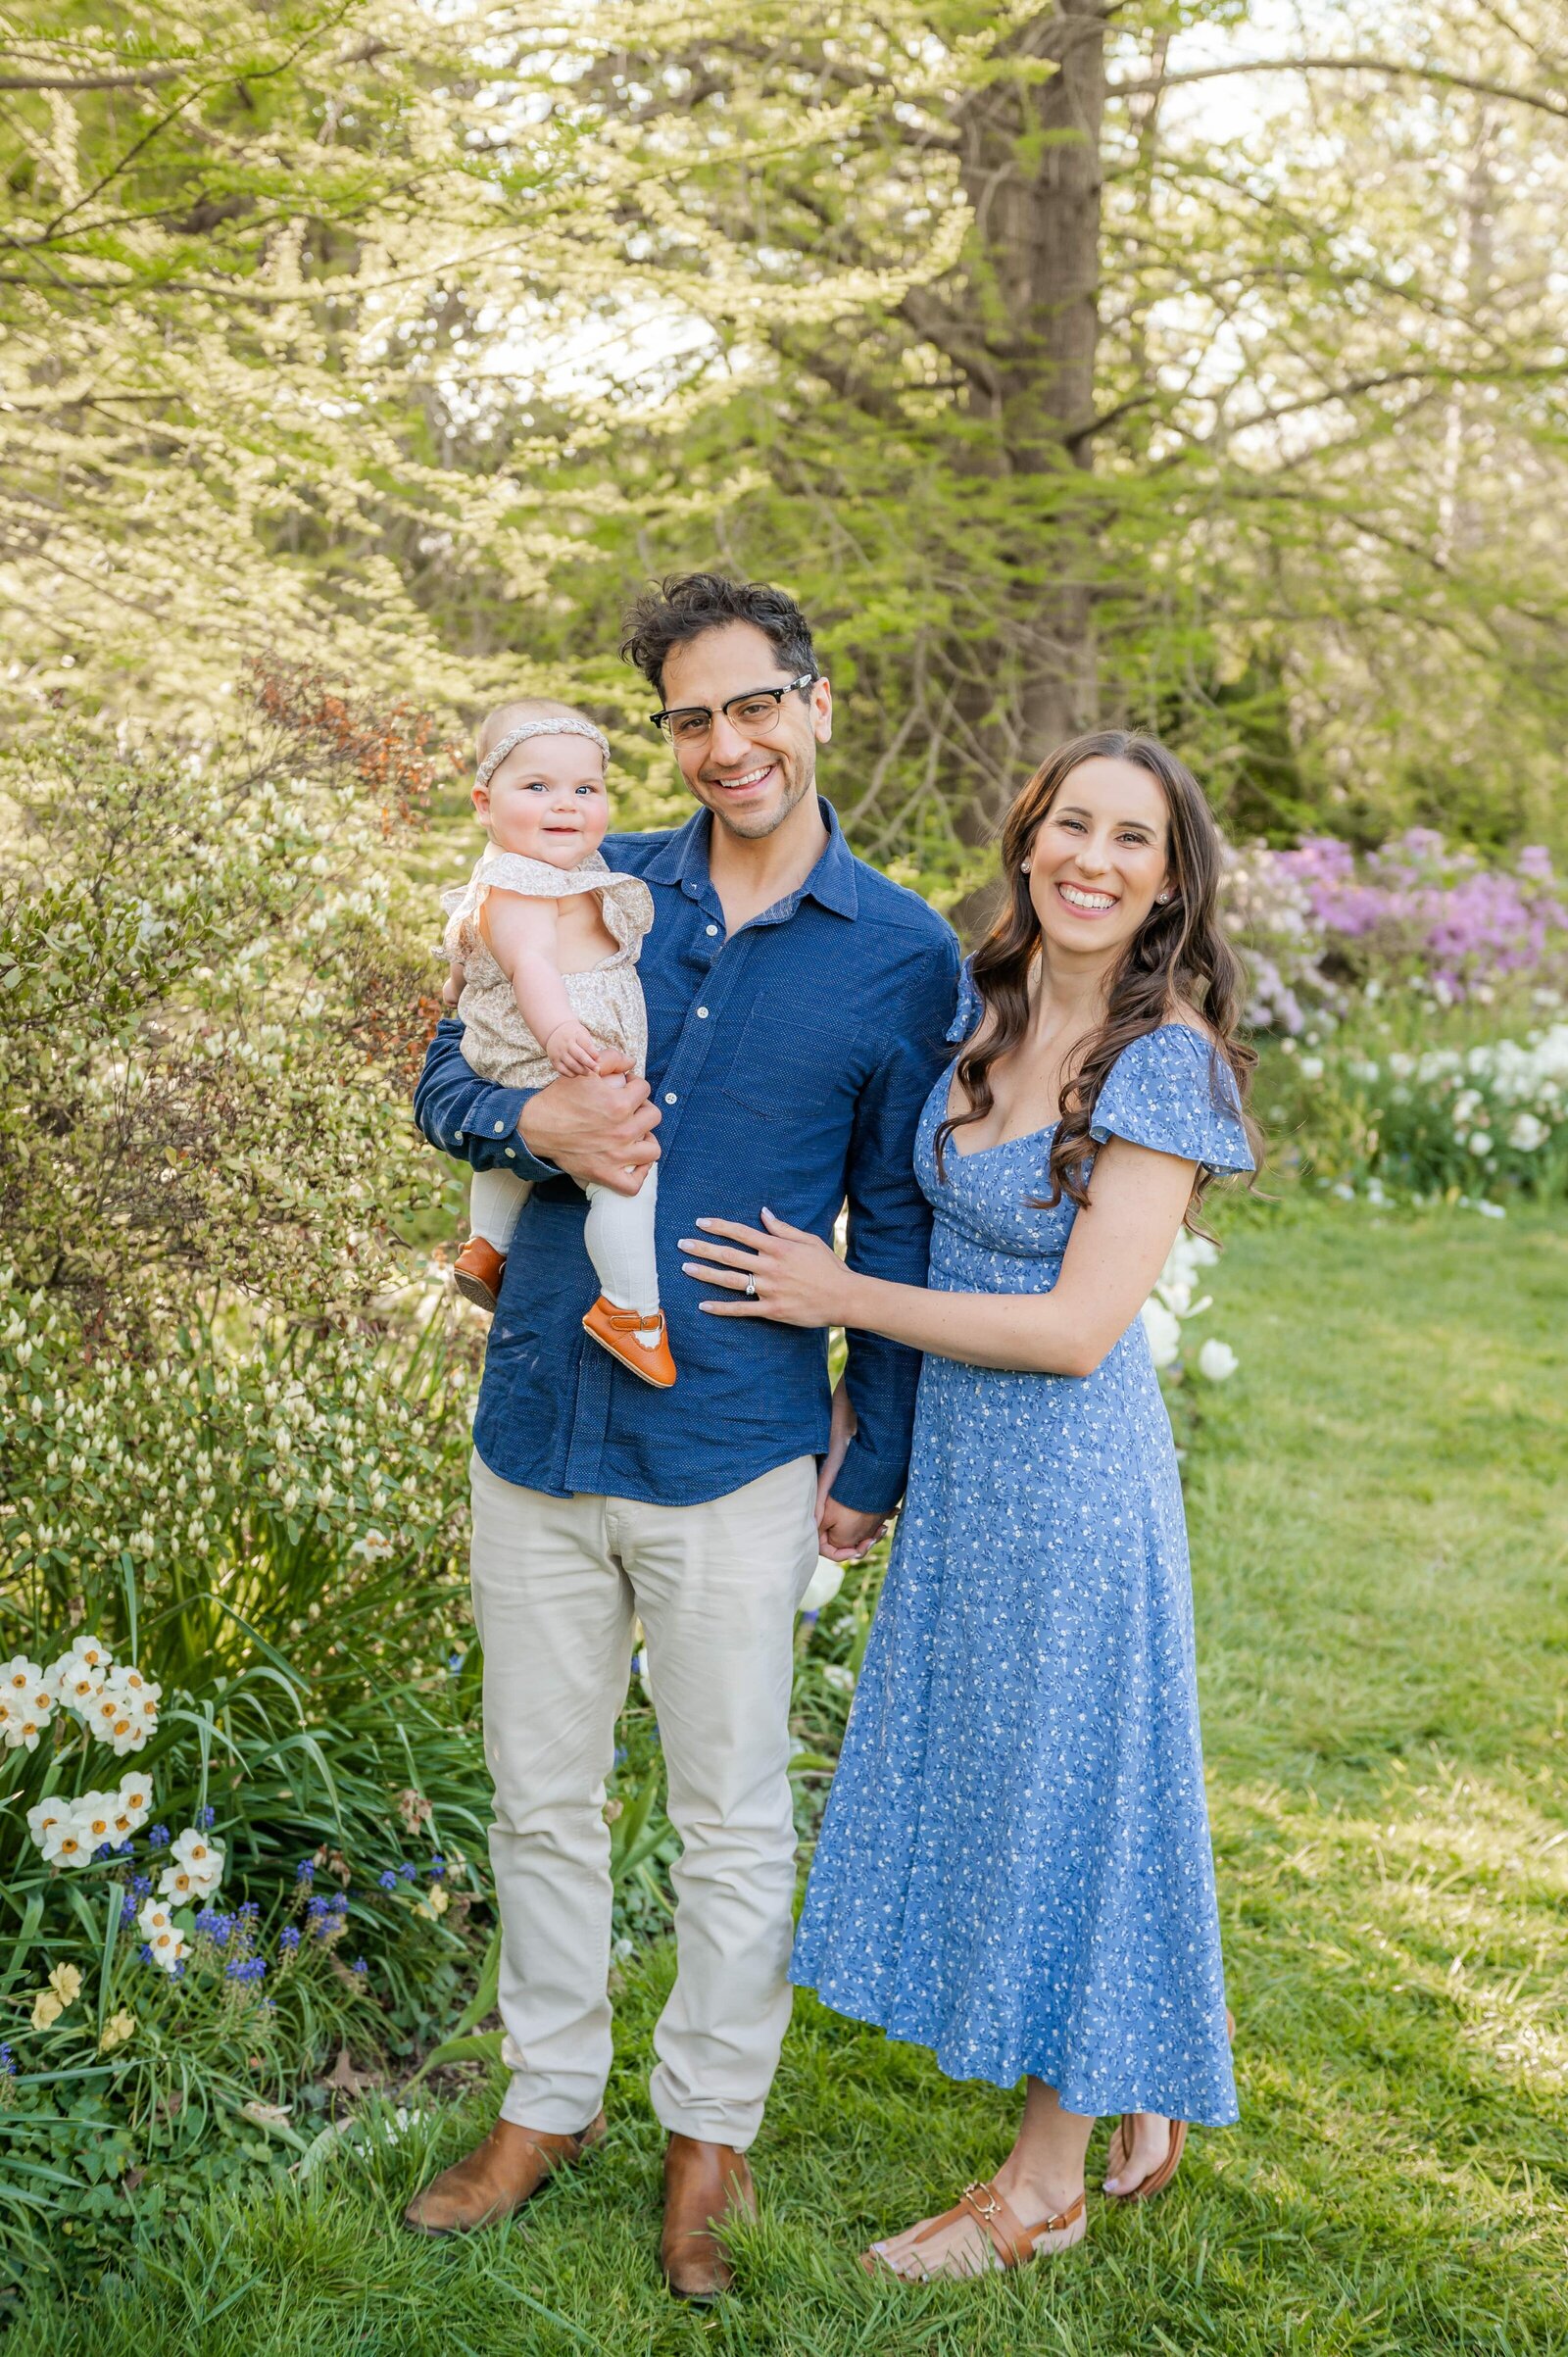 mom, dad and 6 month old girl smiling in a garden of flowers